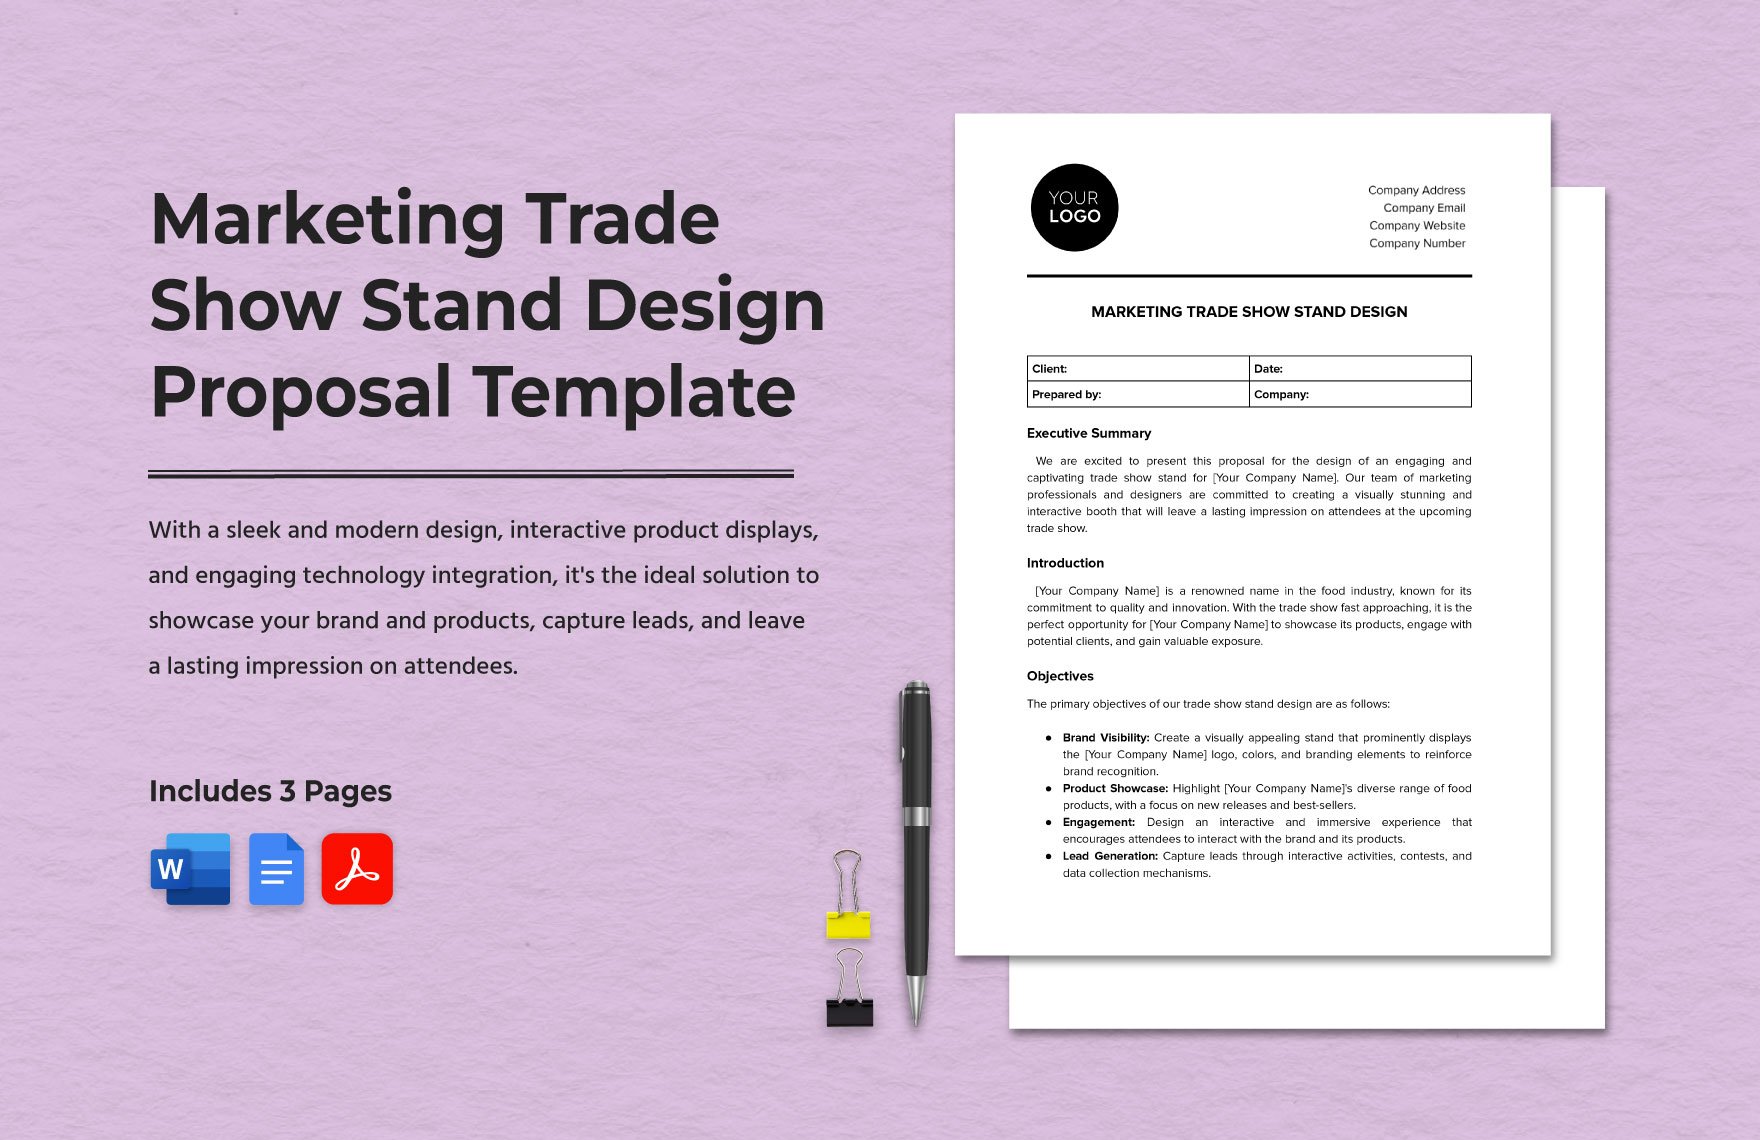 Marketing Trade Show Stand Design Proposal Template in Word, Google Docs, PDF